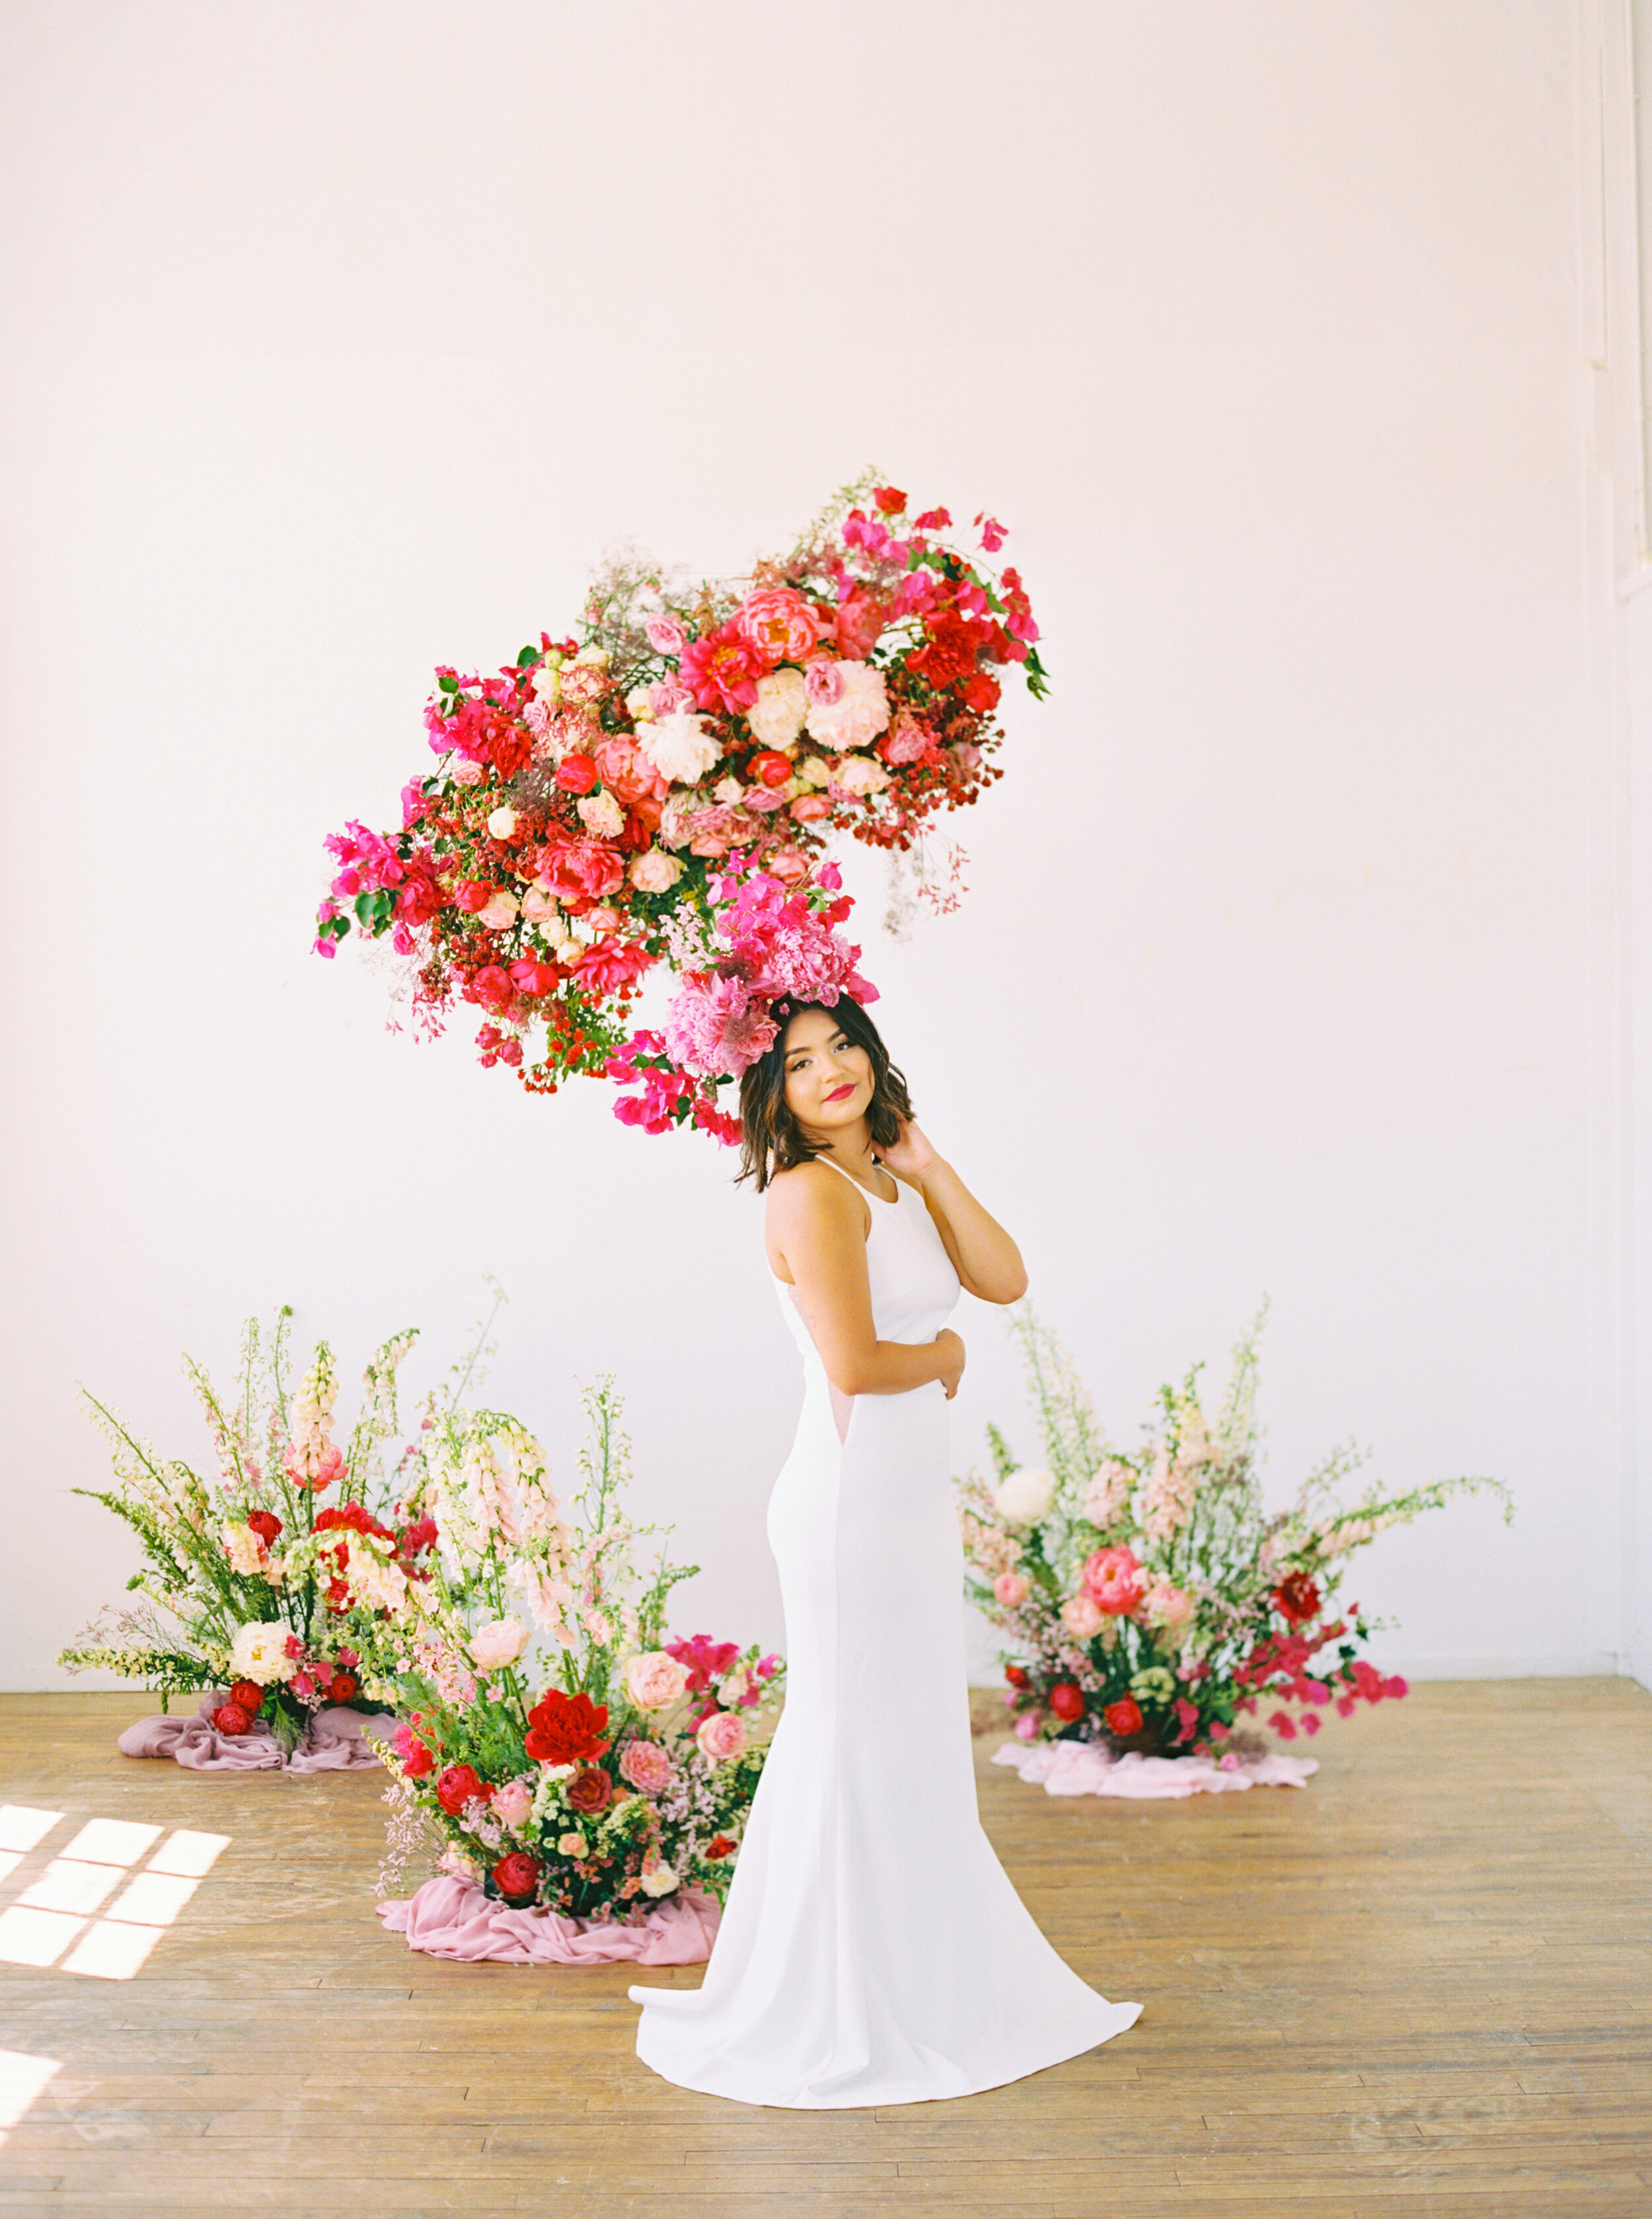 A Romantic Wedding Elopement Filled with Colorful Fuchsia - Sarahi Hadden Submission-107.jpg